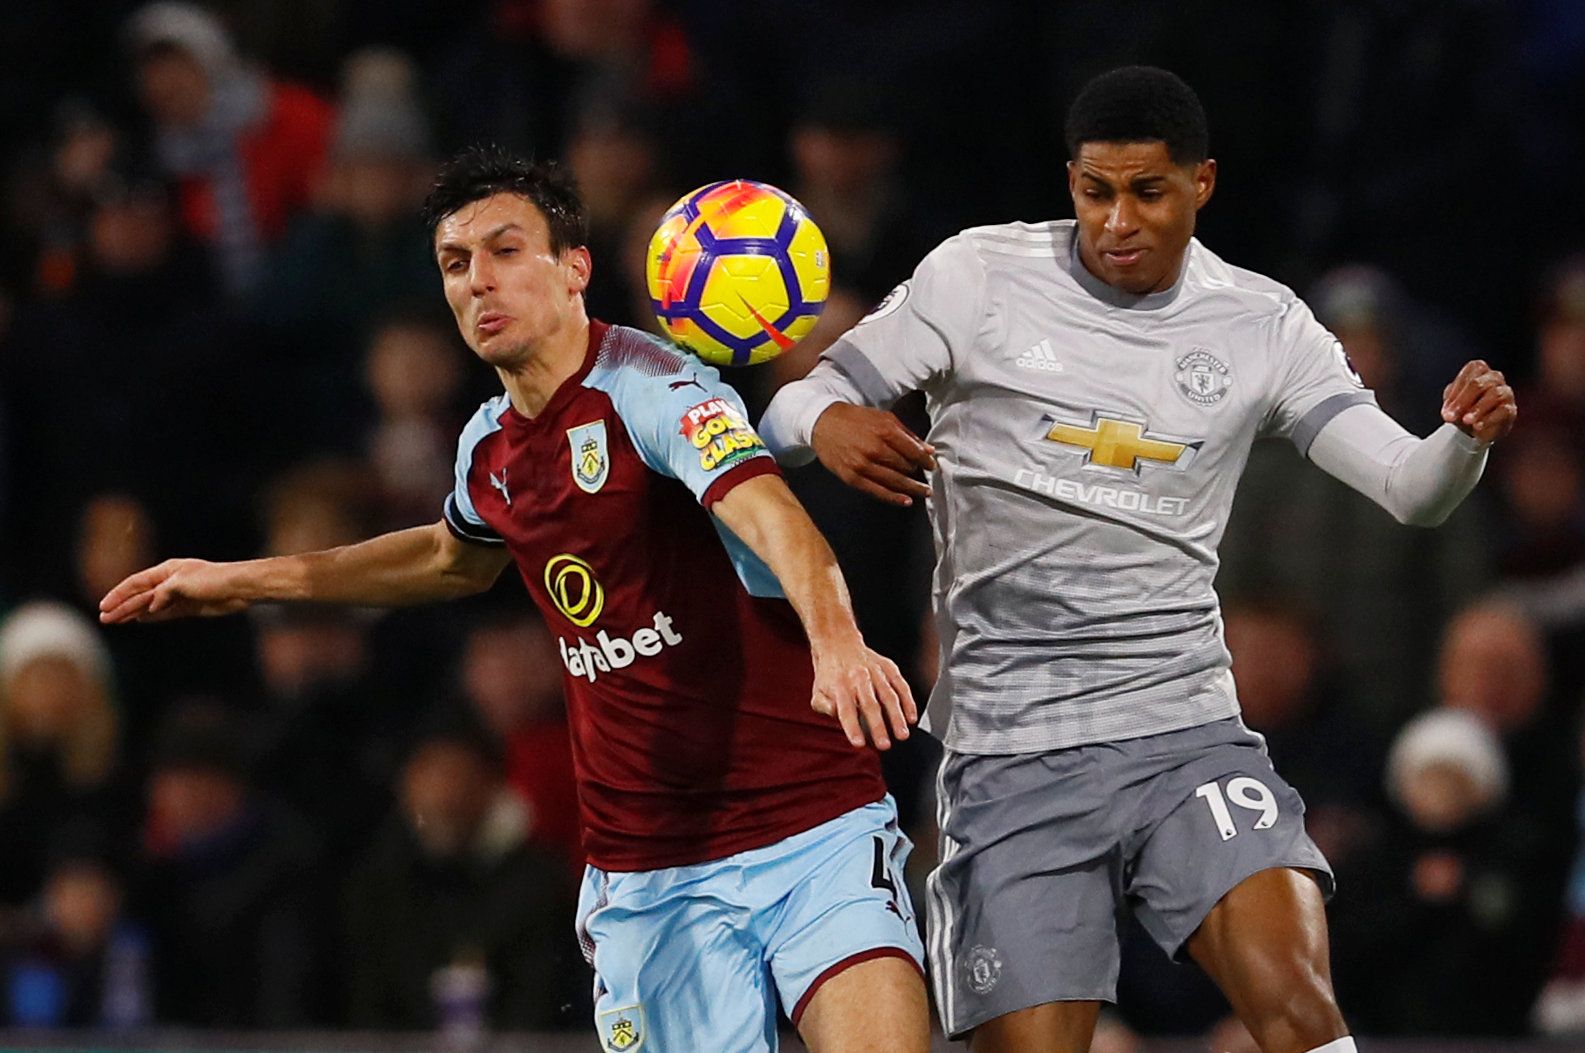 Soccer Football - Premier League - Burnley vs Manchester United - Turf Moor, Burnley, Britain - January 20, 2018   Burnley's Jack Cork in action with Manchester United's Marcus Rashford    Action Images via Reuters/Jason Cairnduff    EDITORIAL USE ONLY. No use with unauthorized audio, video, data, fixture lists, club/league logos or 